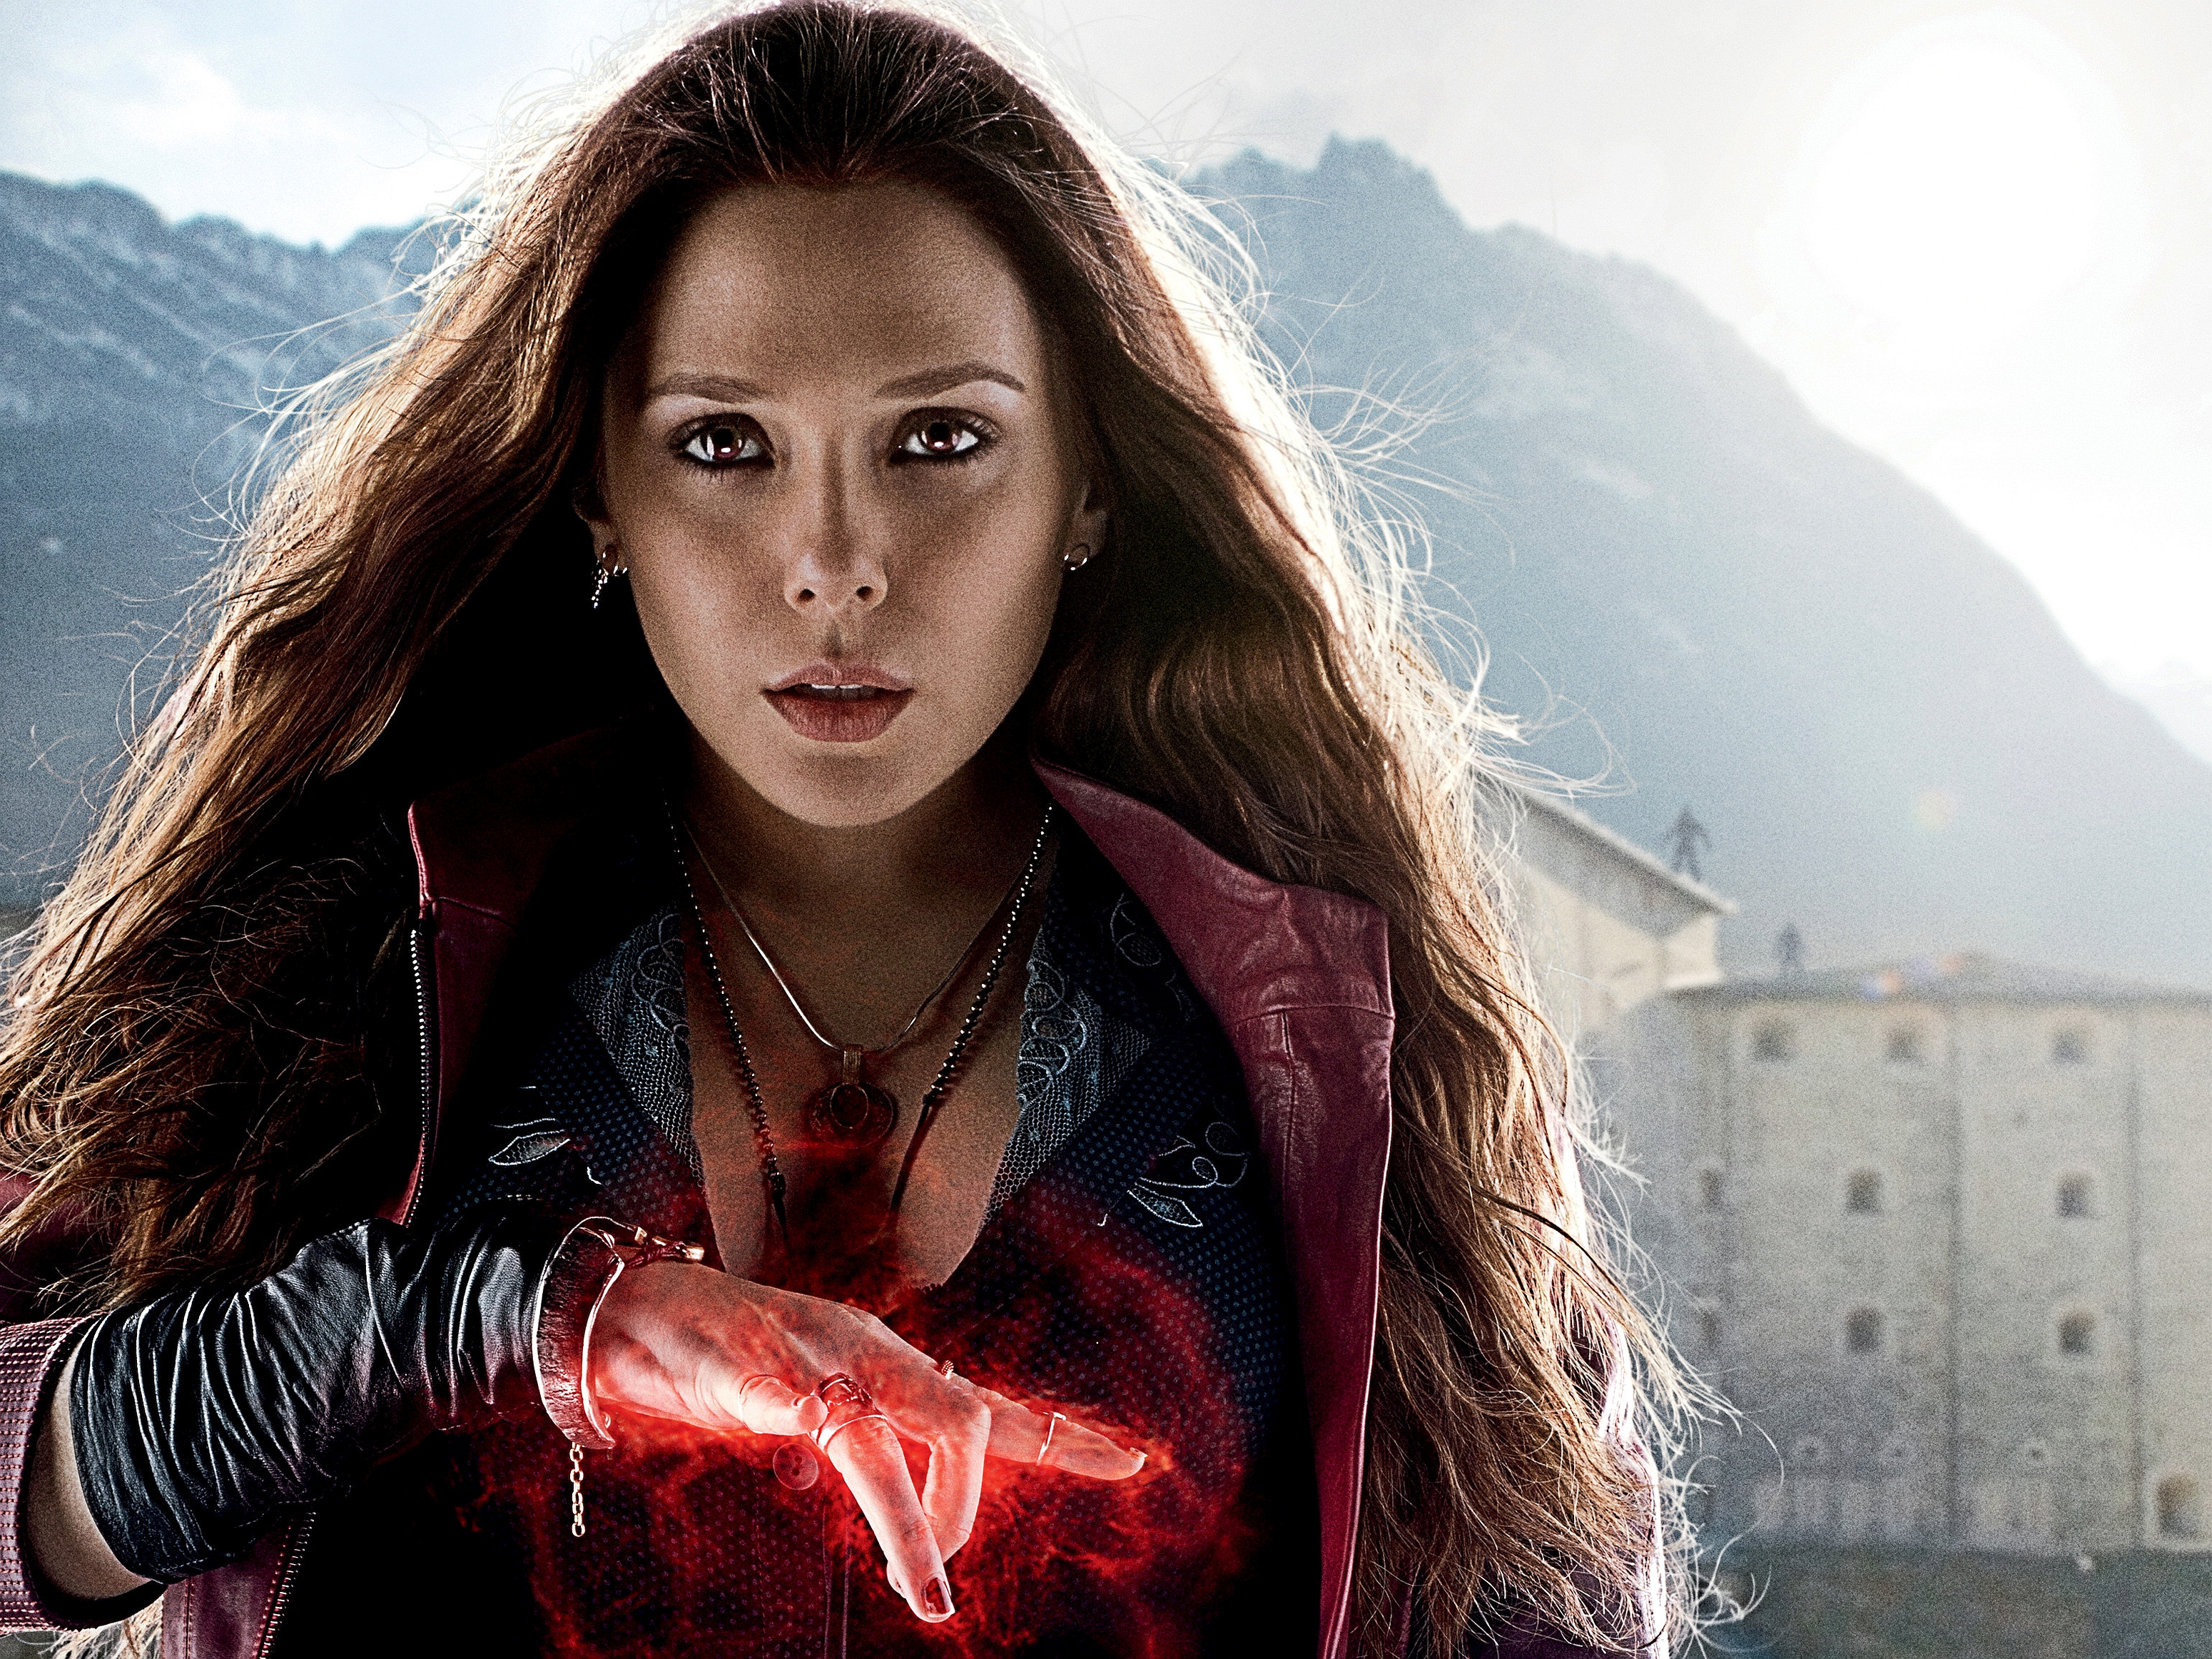 actress, elizabeth olsen, scarlet witch, movie, avengers: age of ultron, american, brunette, the avengers High Definition image